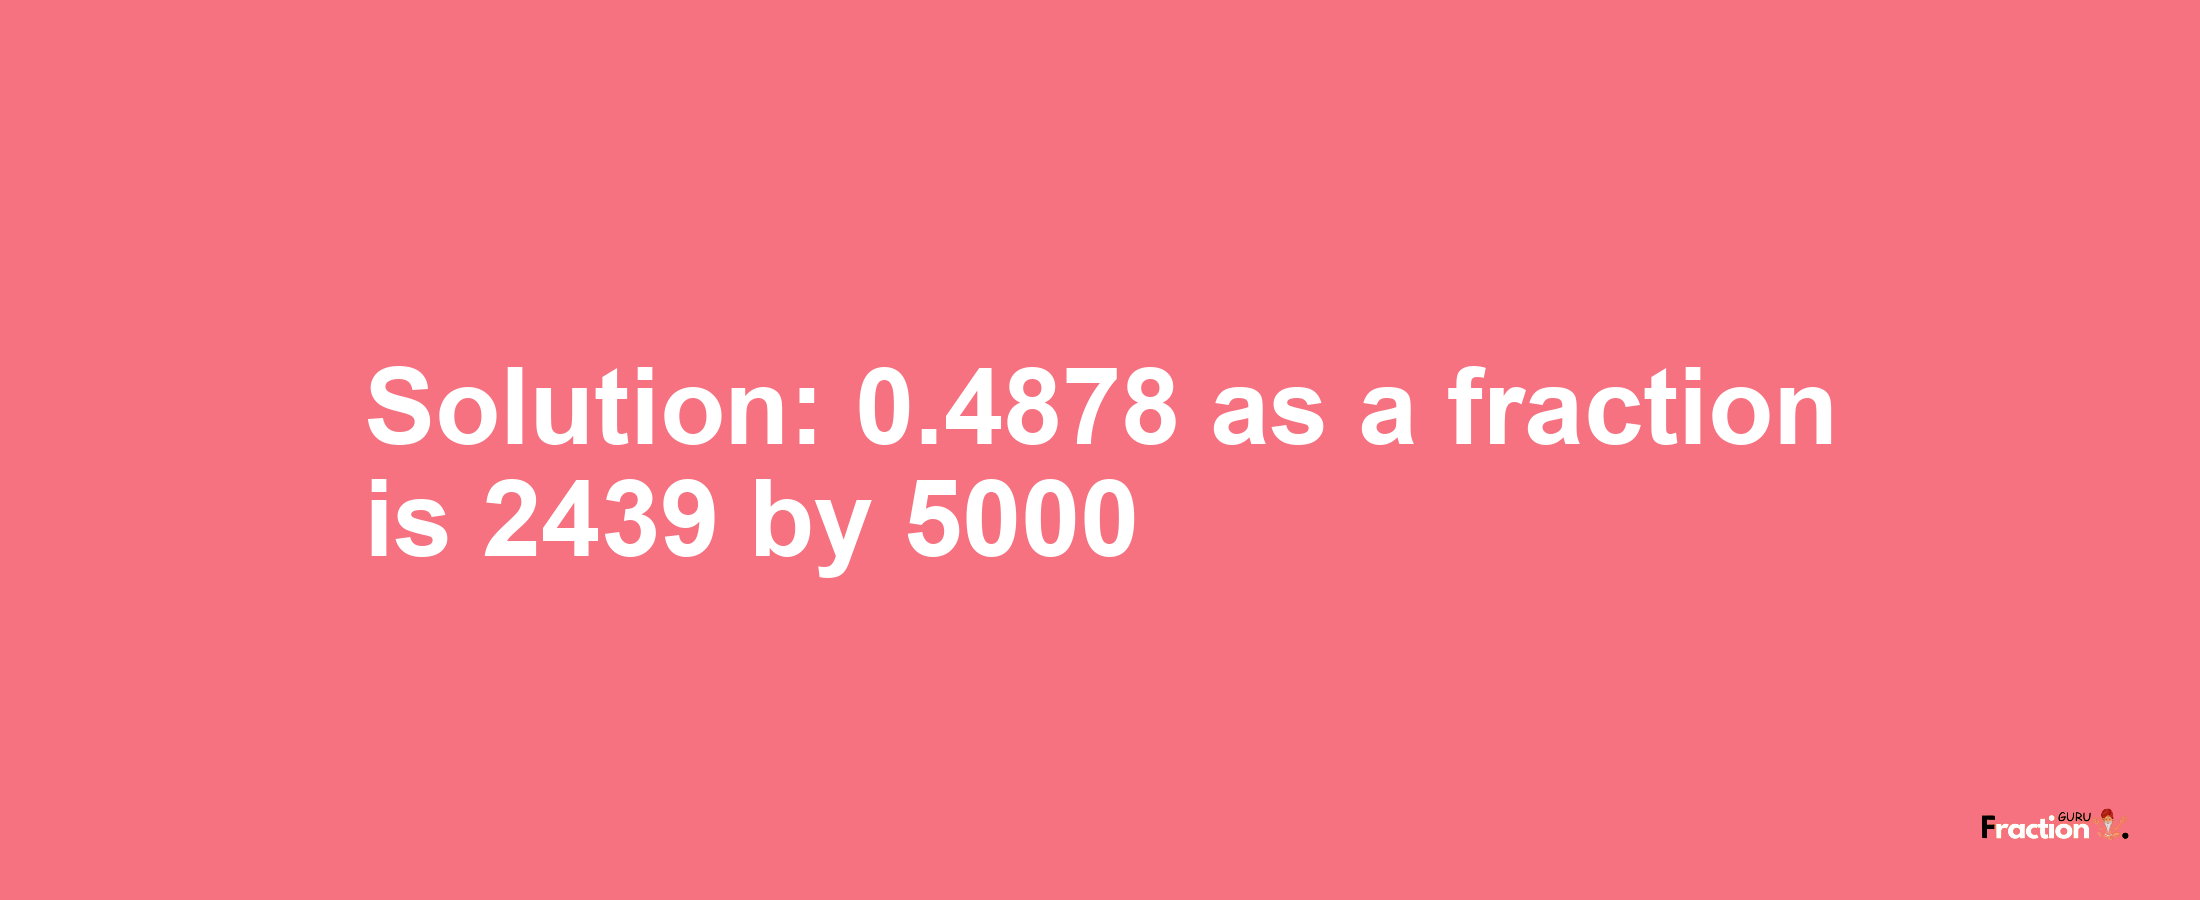 Solution:0.4878 as a fraction is 2439/5000